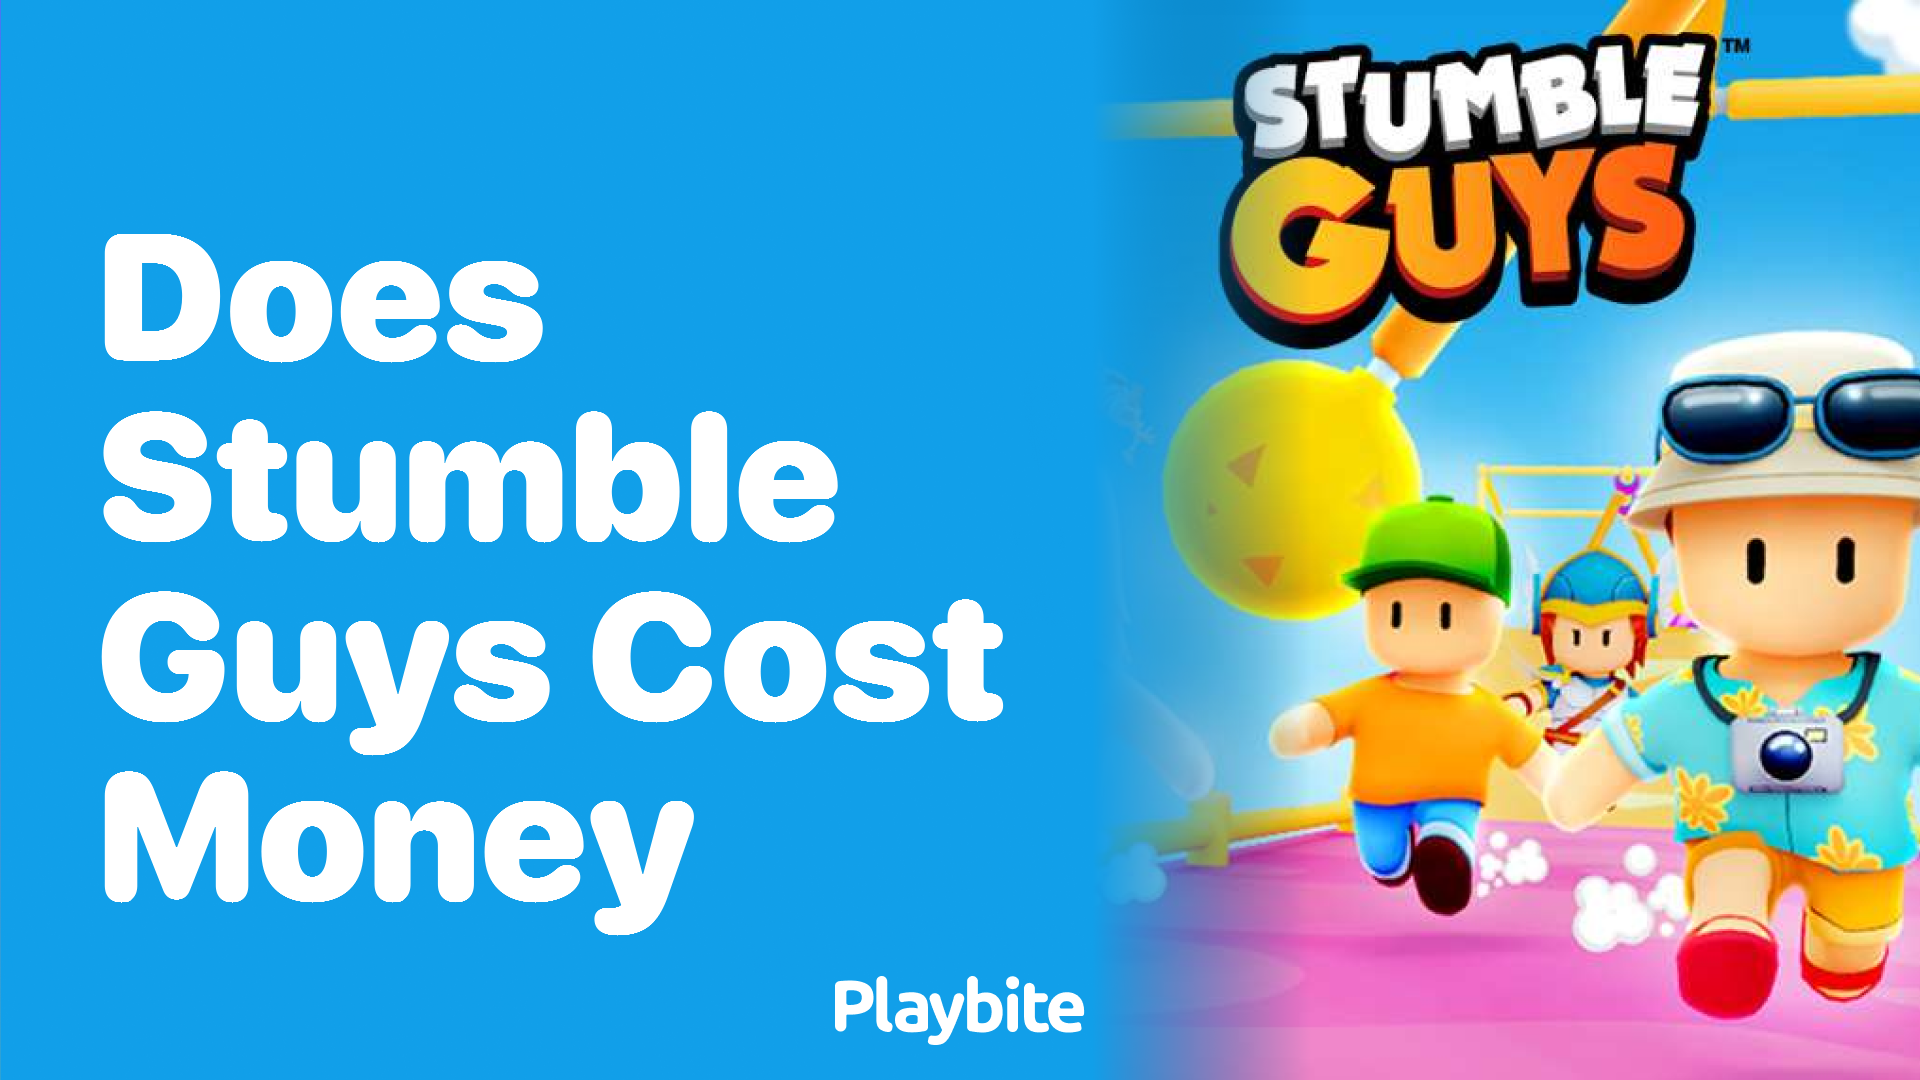 Does Stumble Guys Cost Money? Unwrapping the Truth